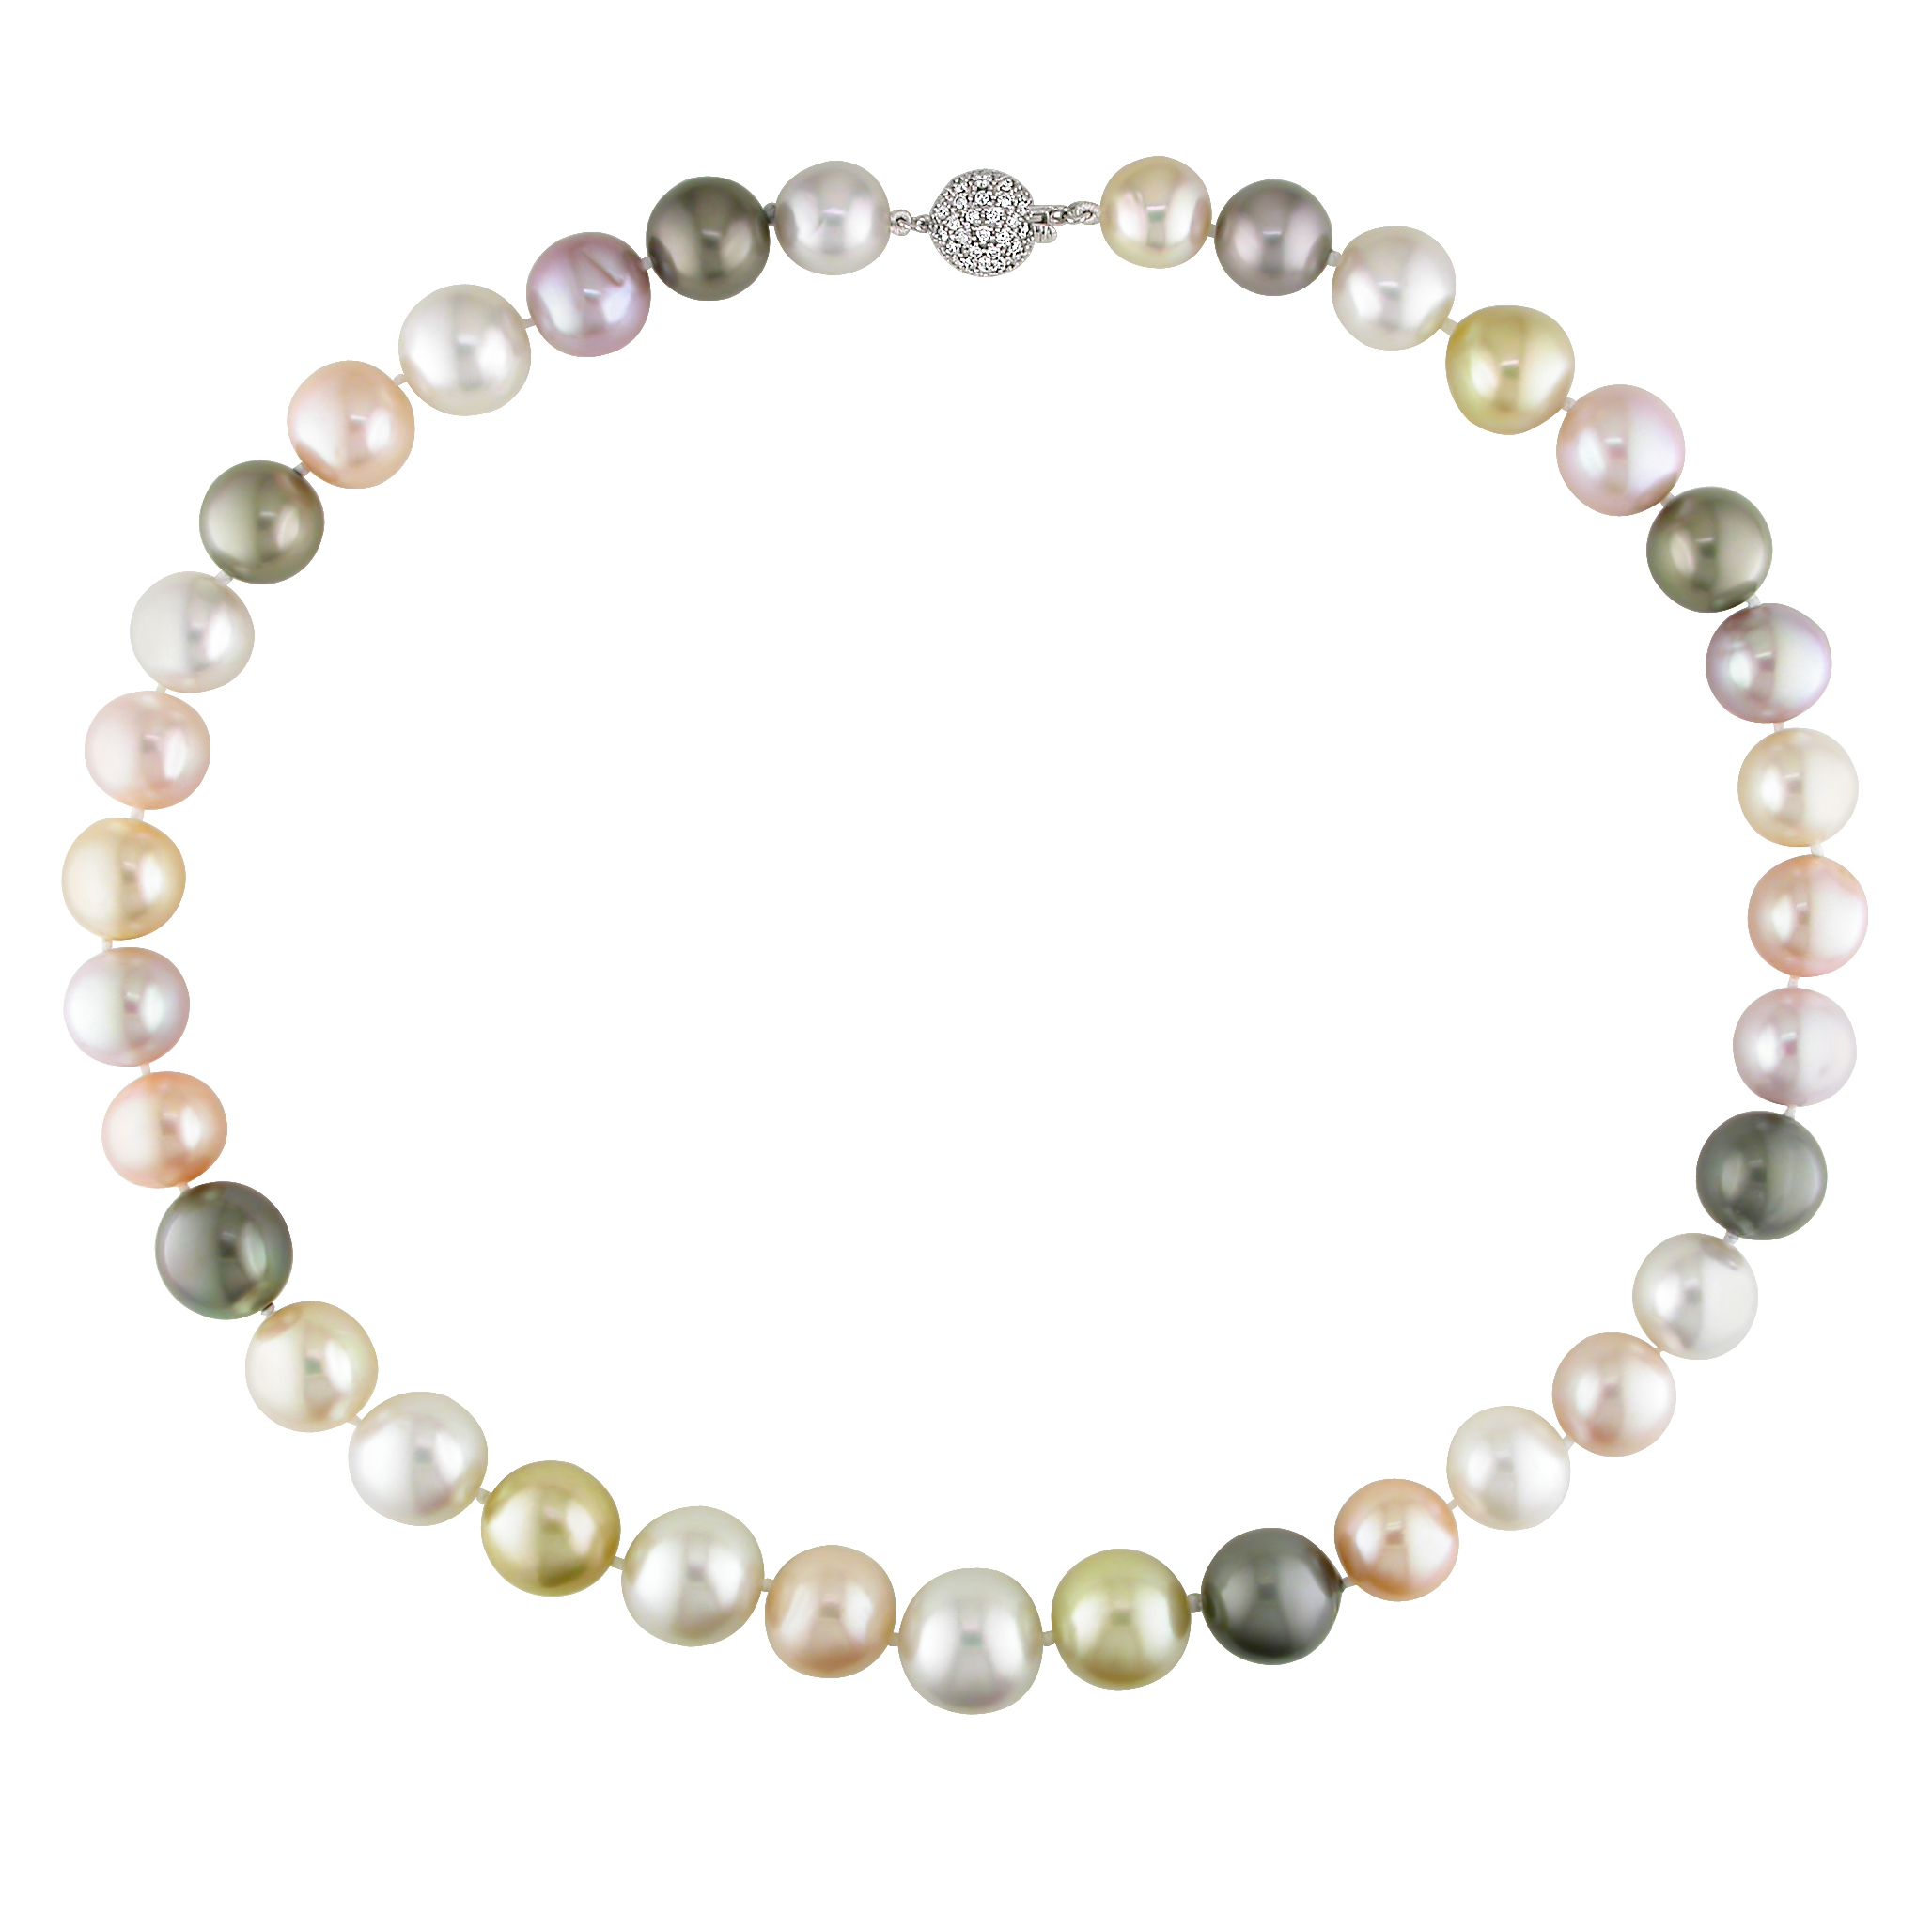 10.5-13.7 MM White and Yellow South Sea, Grey Tahitian and Pink Cultured Freshwater Pearl Strand with 14k White Gold 7/8 CT TW Diamond Ball Clasp - 18 in